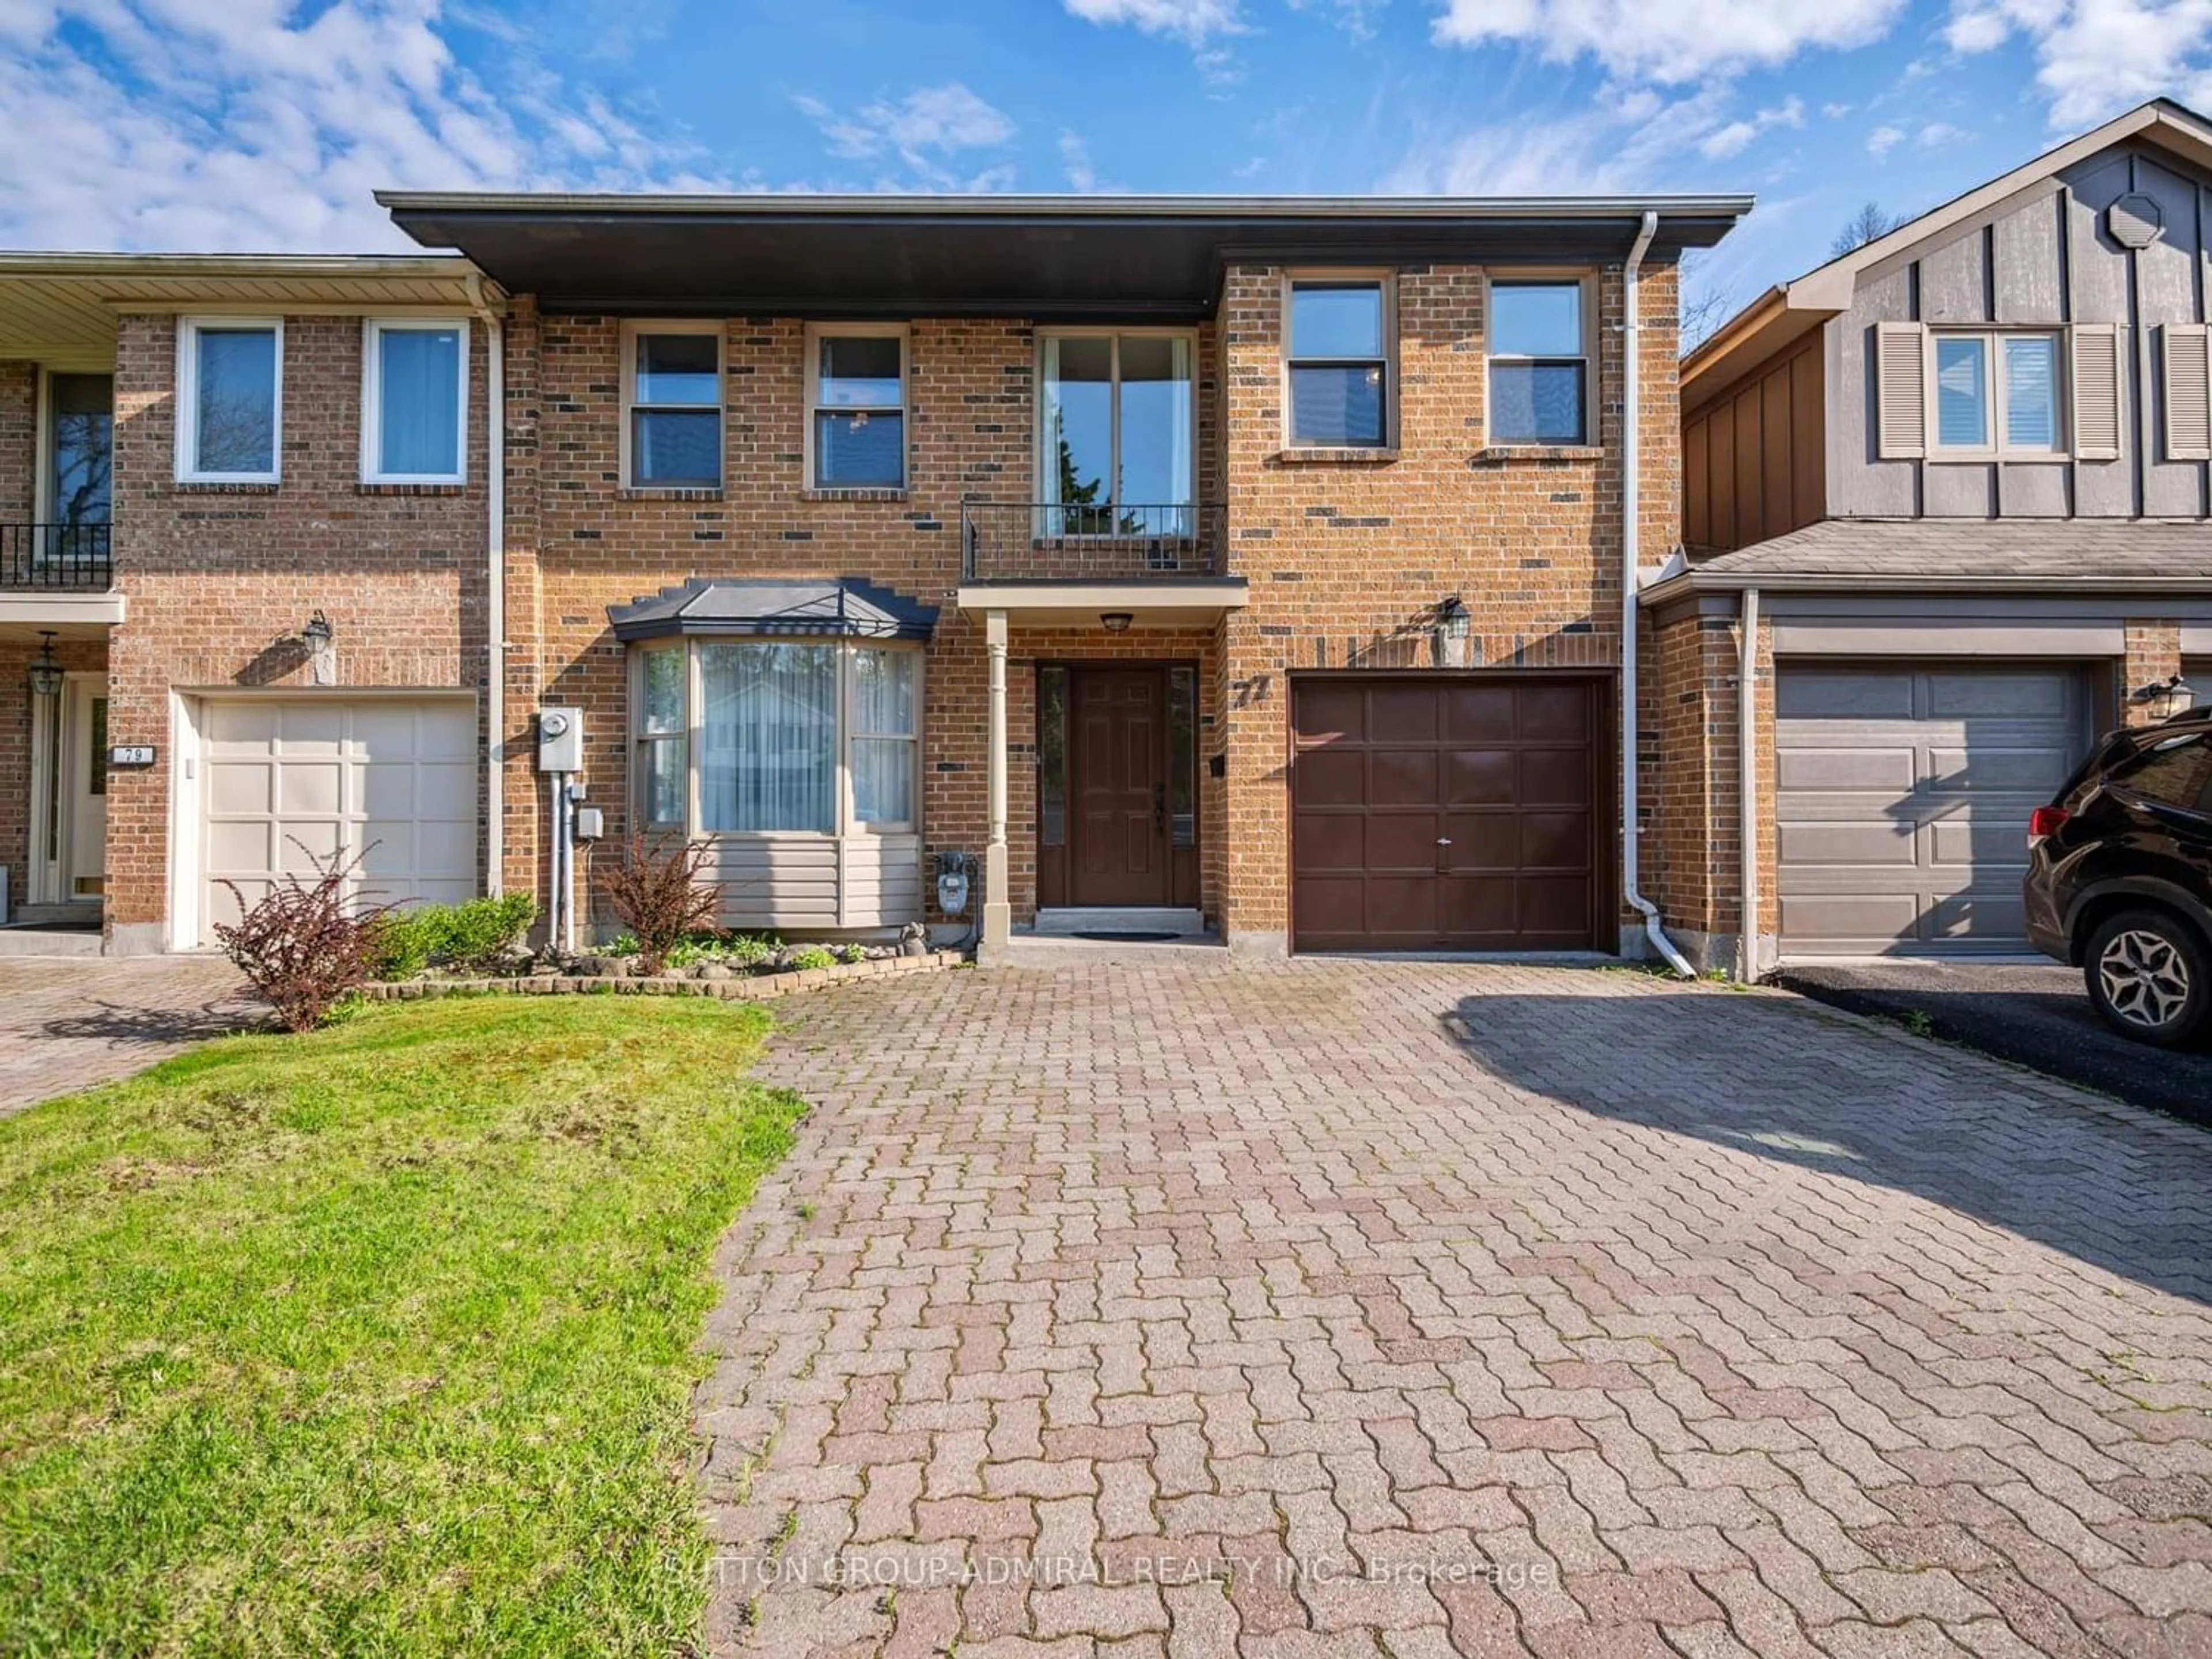 Home with brick exterior material for 77 Chiswell Cres, Toronto Ontario M2N 6G2